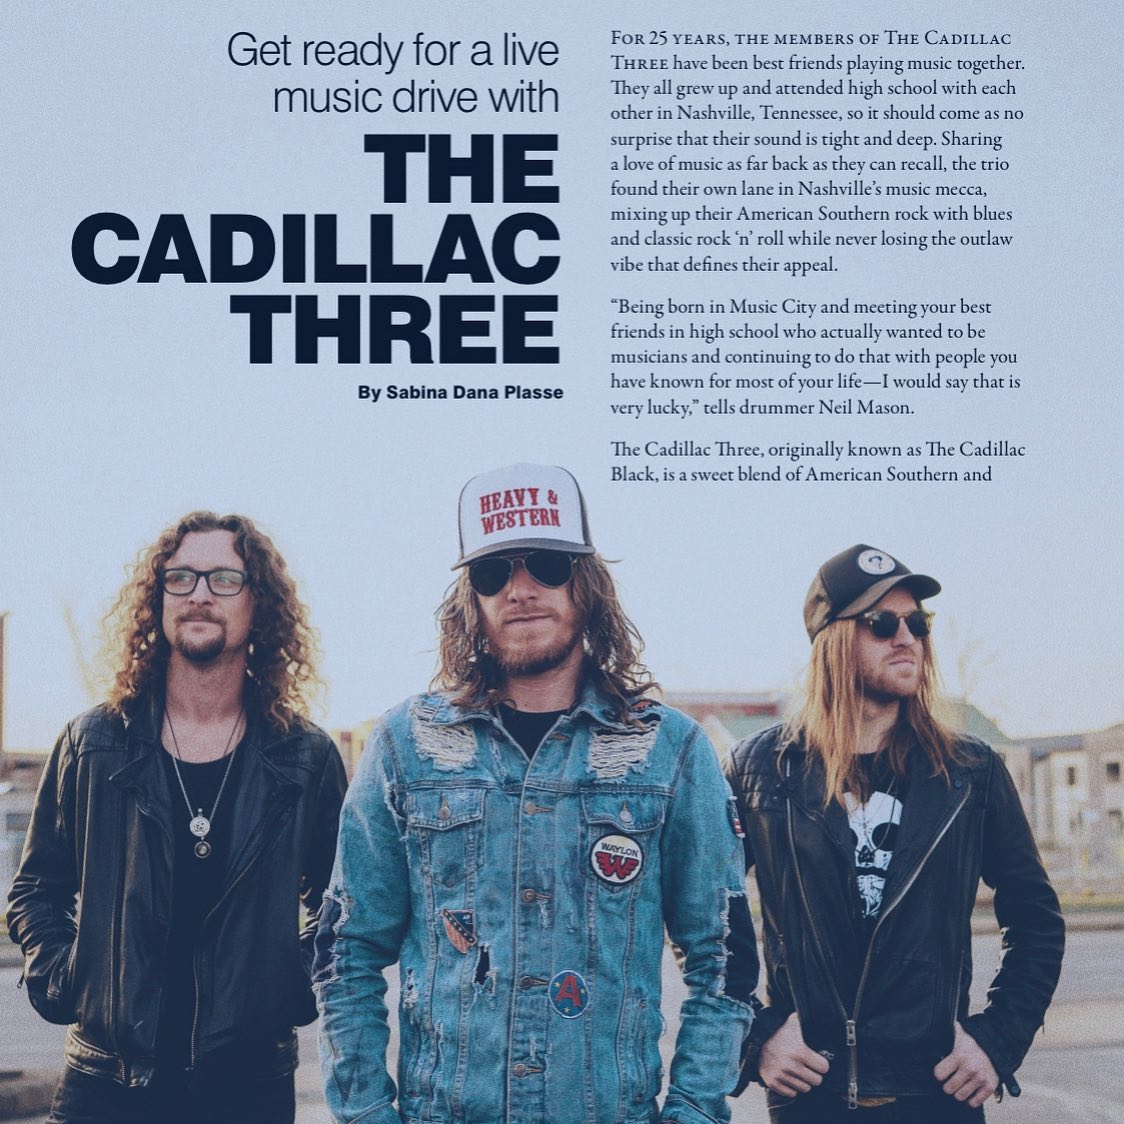 Who’s ready for some full-on live music? Nashville’s very own, The Cadillac Three, is in town at the Sun Valley Pavilion on Saturday, June 18, with The Powell Brothers. This show will not disappoint! Grab some tickets today.  @svpnmagazine @thecadillac3 @brotherspowell @rjkentertainment @sunvalley #svpnmagazine #thecadillacthree #thepowellbrothers #rjkentertainment #sunvalleyidaho #sunvalleyresort #sunvalleypavilion #rockandroll #nashvillesbest #livemusic #summerconcerts